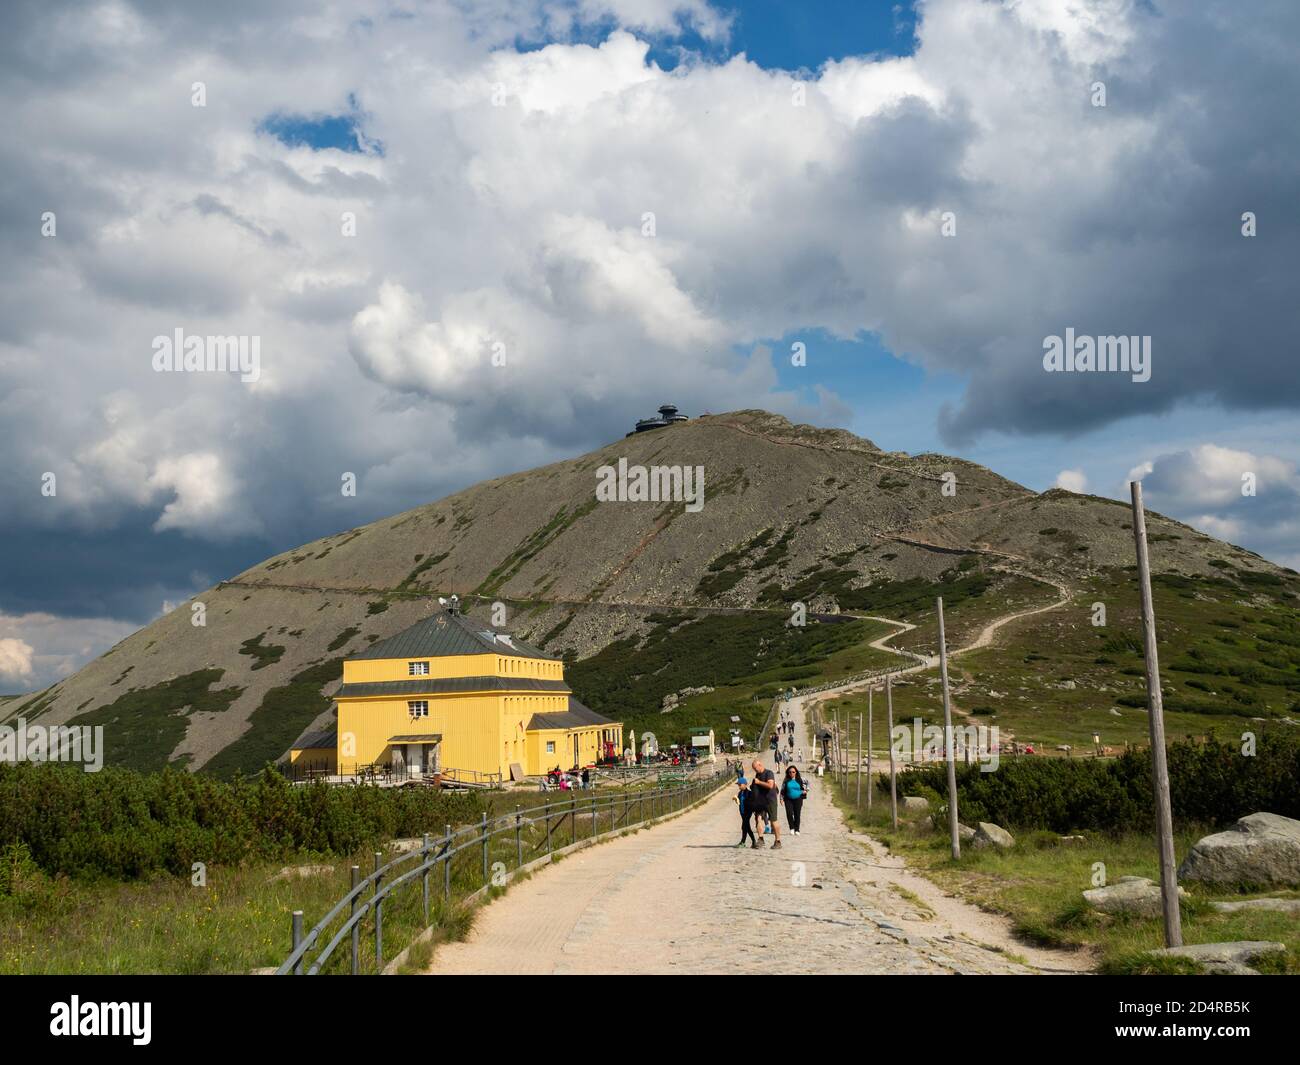 Karpacz/Poland - 24/10/2020 - Trail to the top of Sniezka mountains. Shelter of Silesian House. People on the trail. Stock Photo